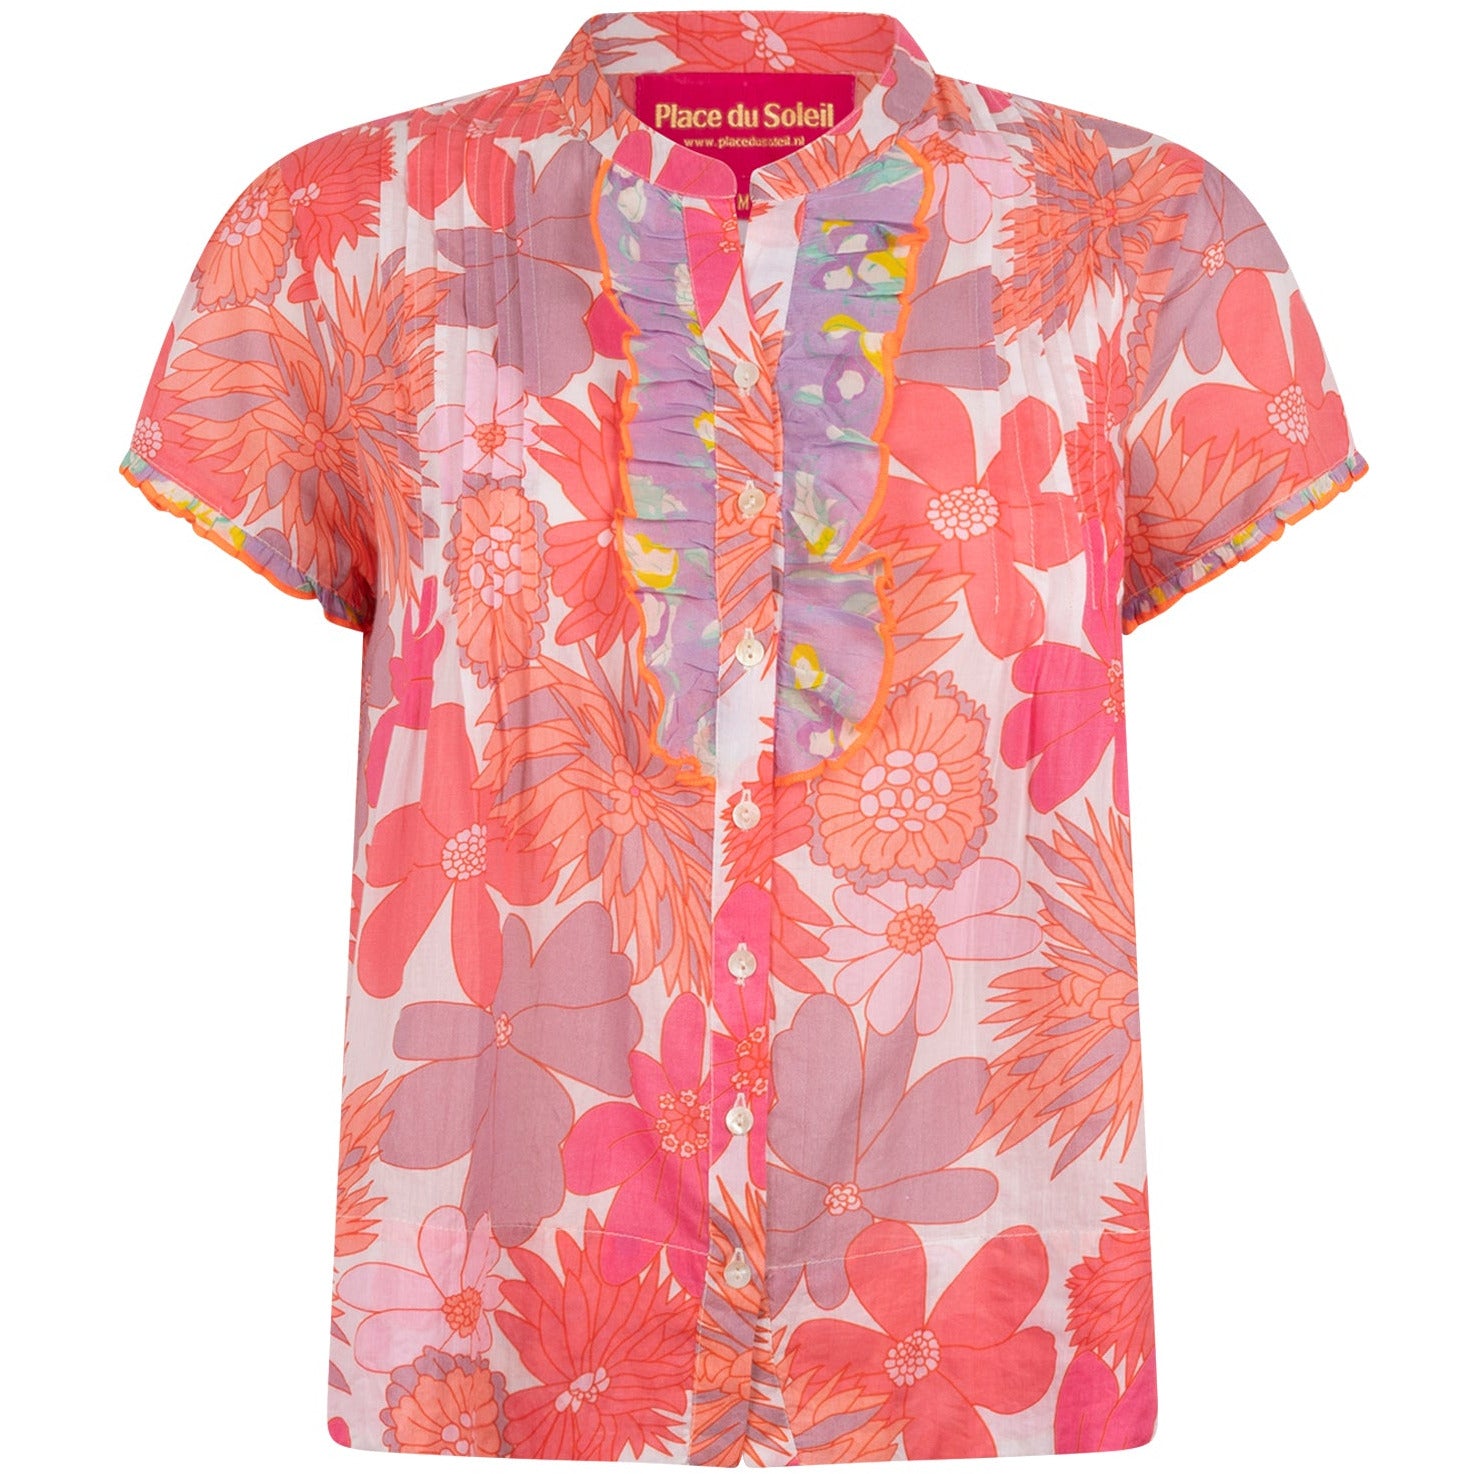 printed in pretty pink and orange tropical blooms, with a round neckline, contrasting button placket, and frilly, flouncy sleeves t